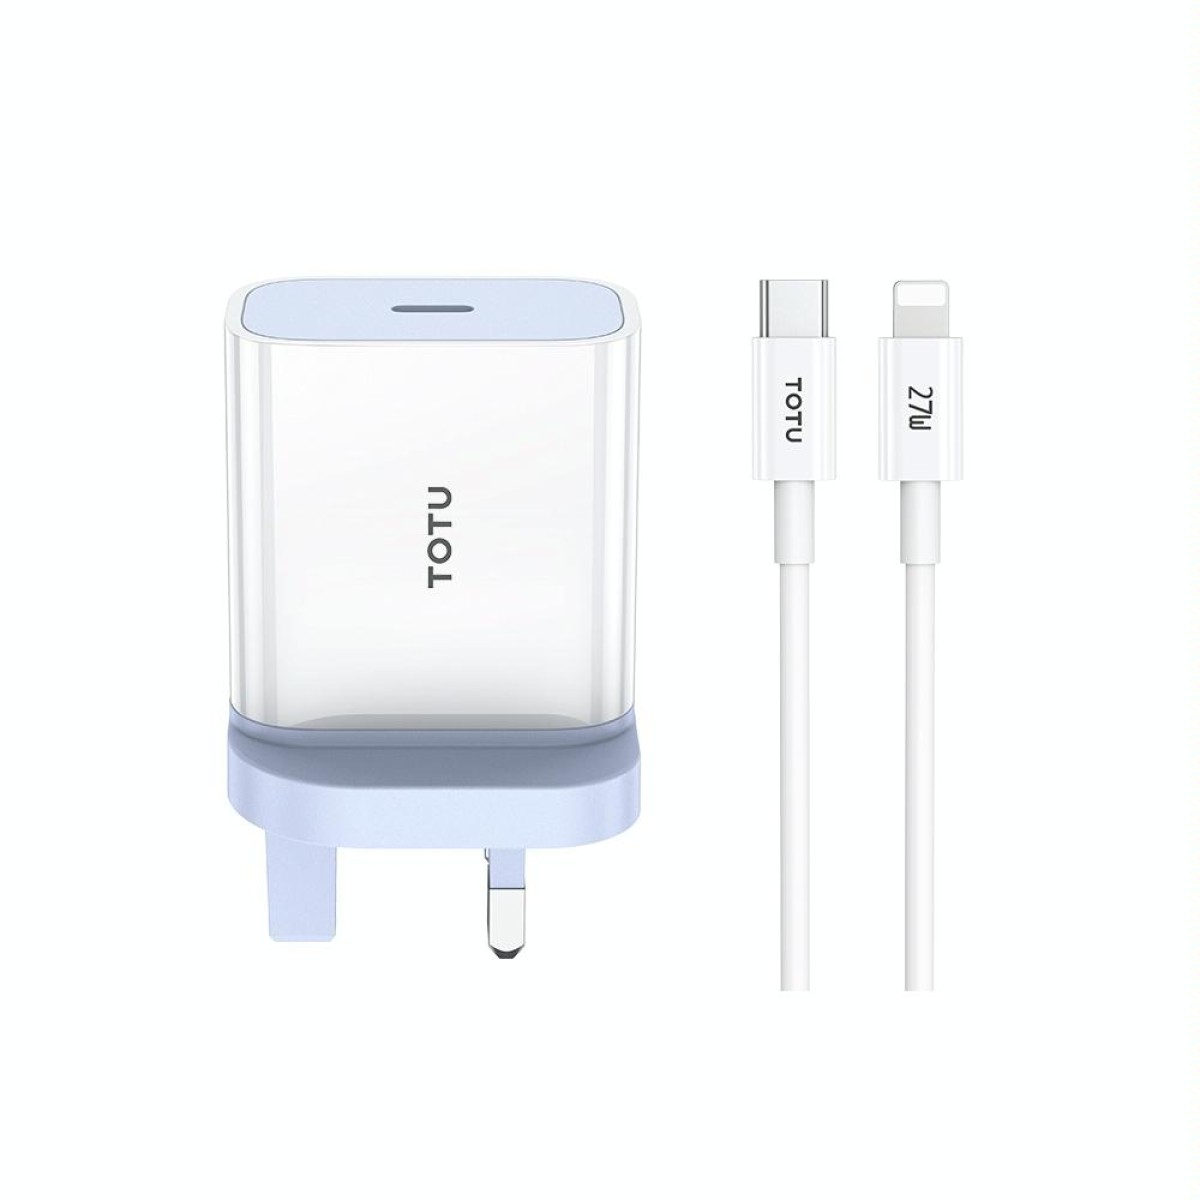 TOTU ZC32 PD 20W Type-C Port Charger with Type-C to 8 Pin Data Cable Set, Specification:UK Plug(White)